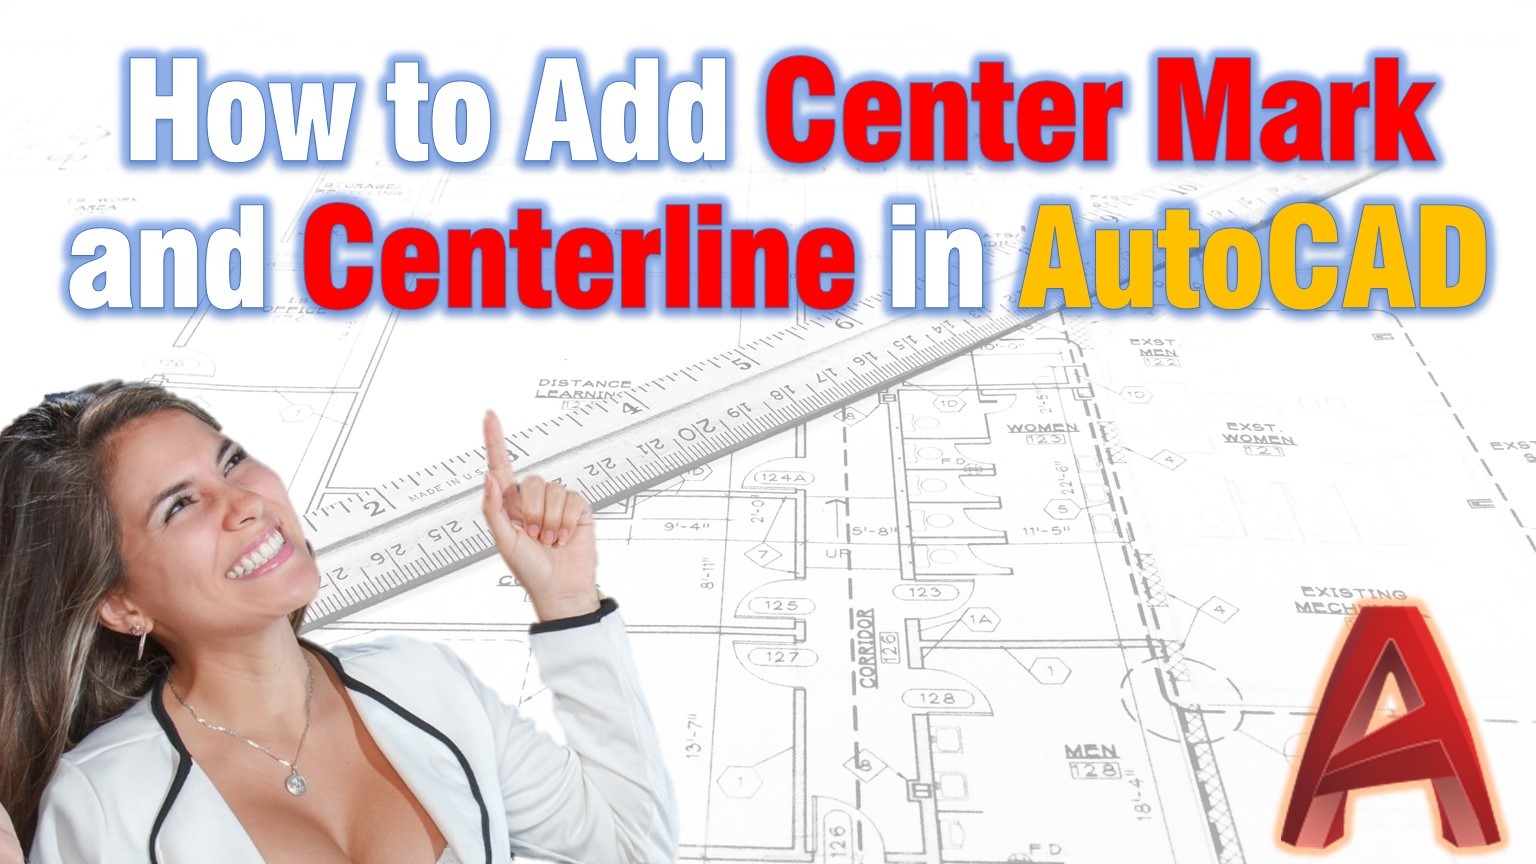 how to add centerline or centermark in AutoCAD